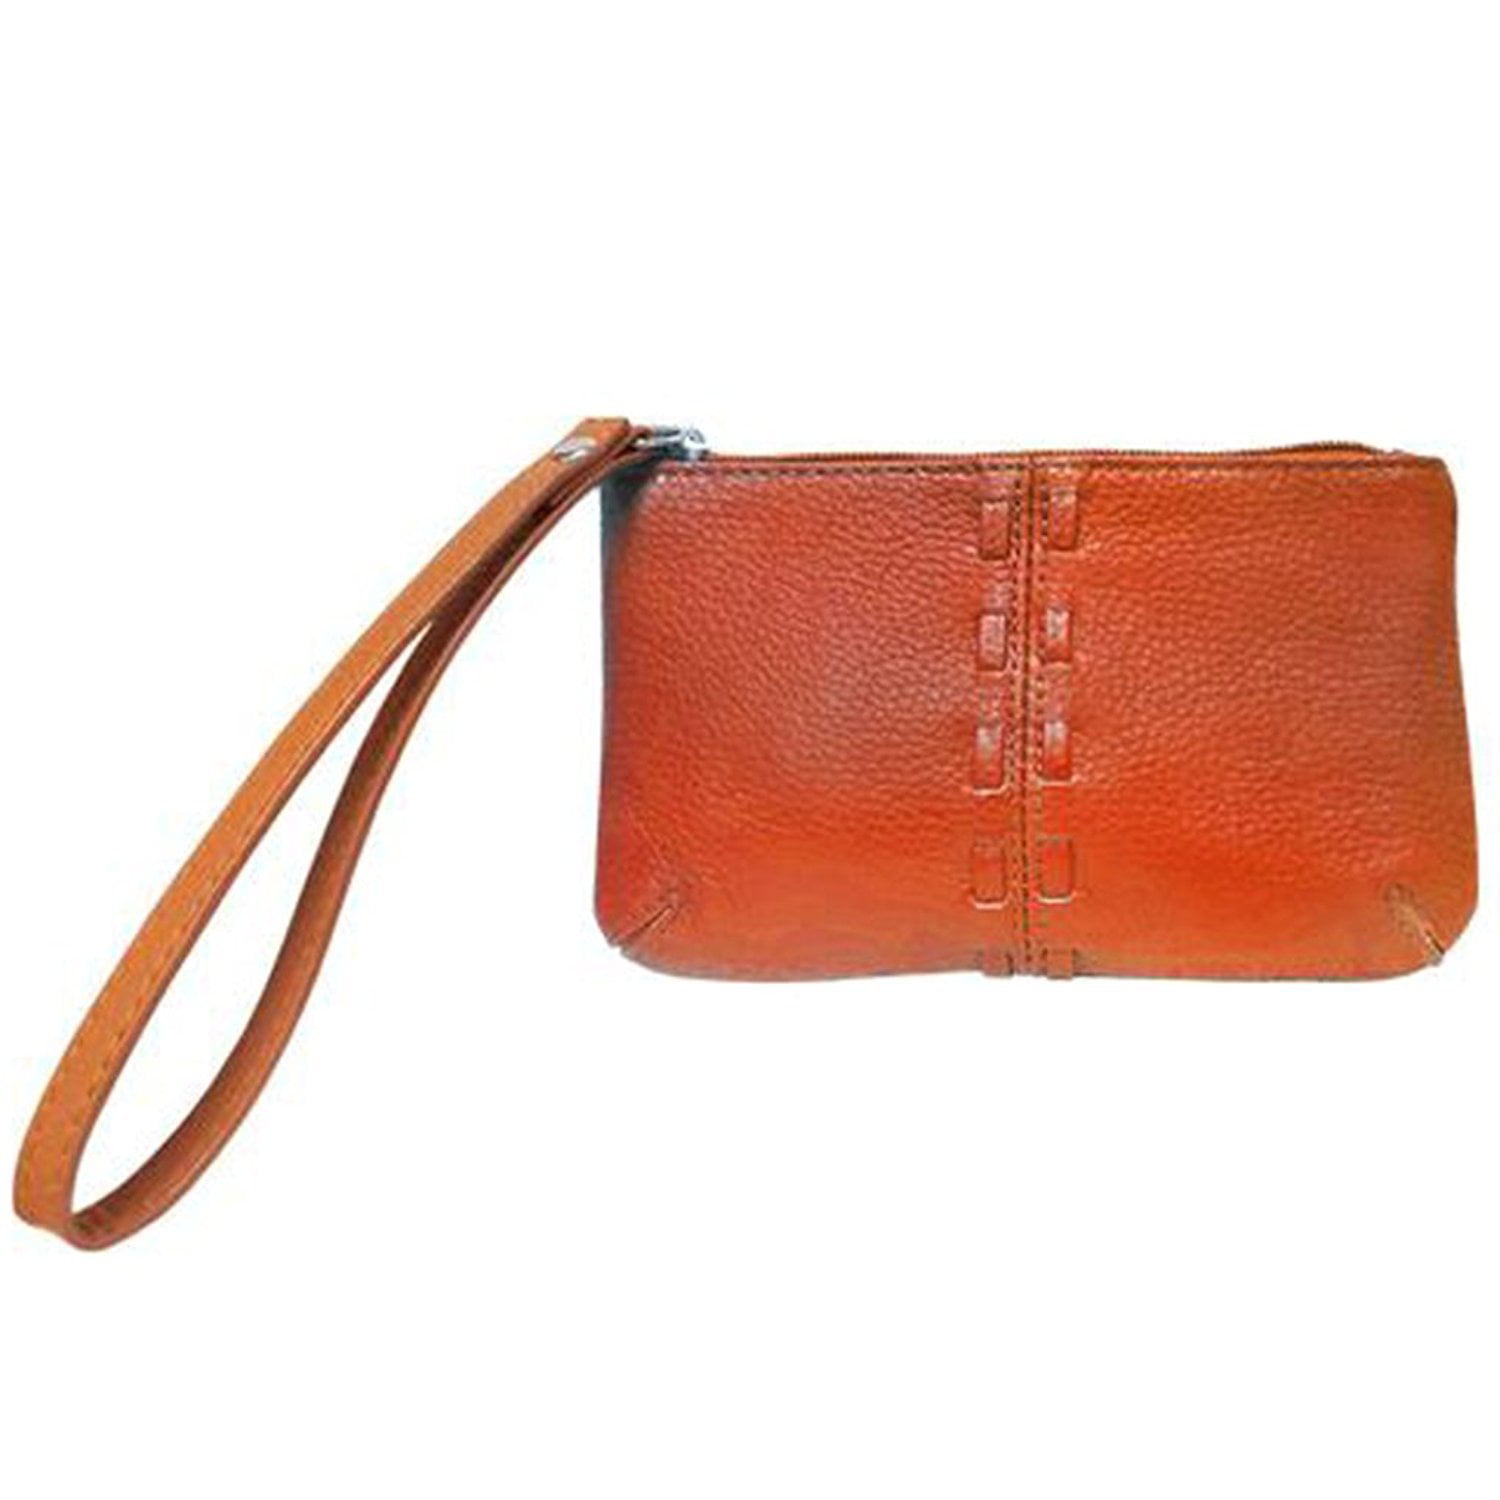 SILVERFEVER Cowhide Leather Wristlet Purse Wallet Whipstitched Detail (Red) - www.bagssaleusa.com